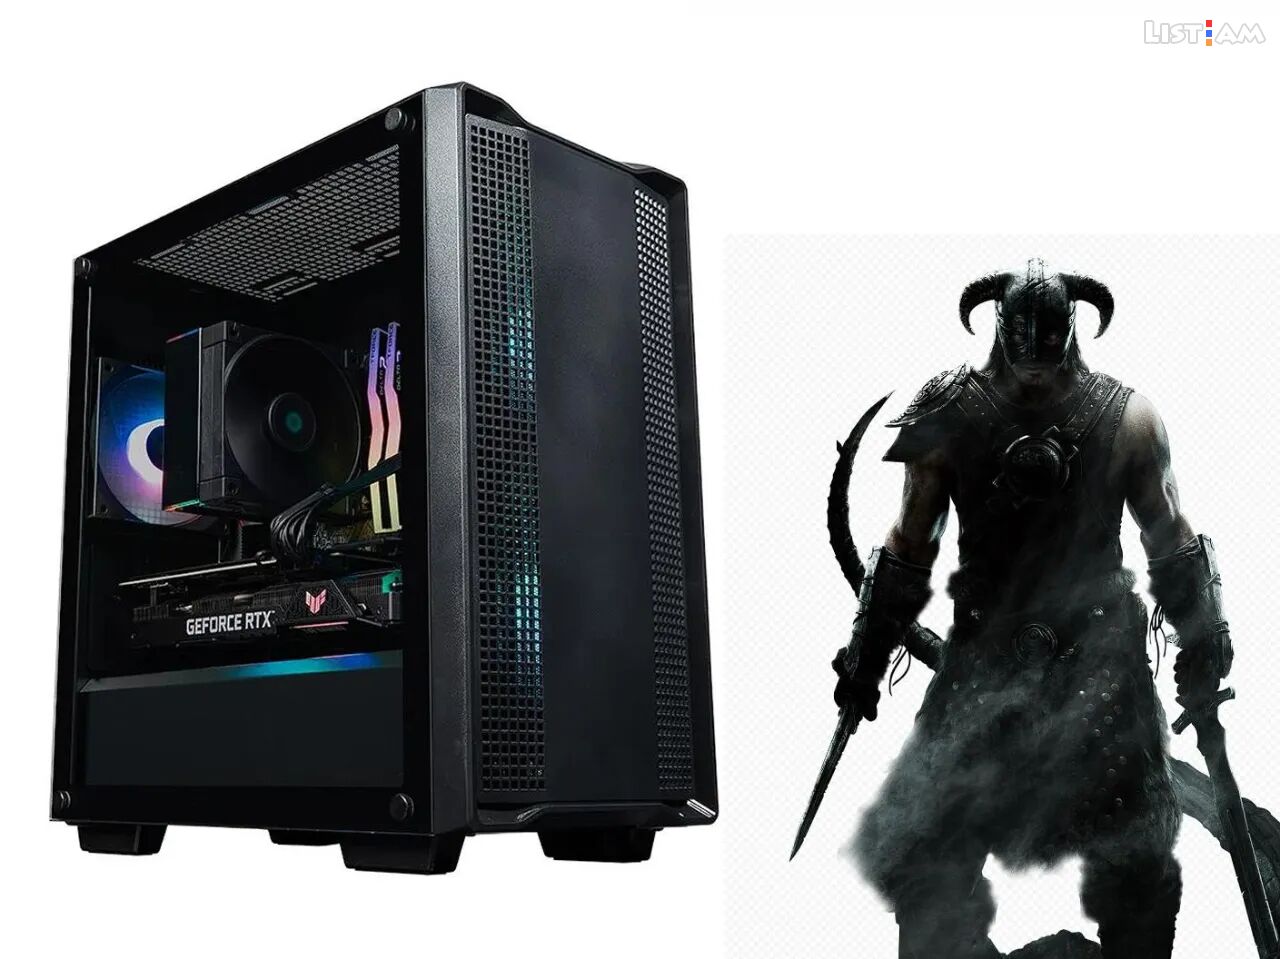 GAMING PC Core i5